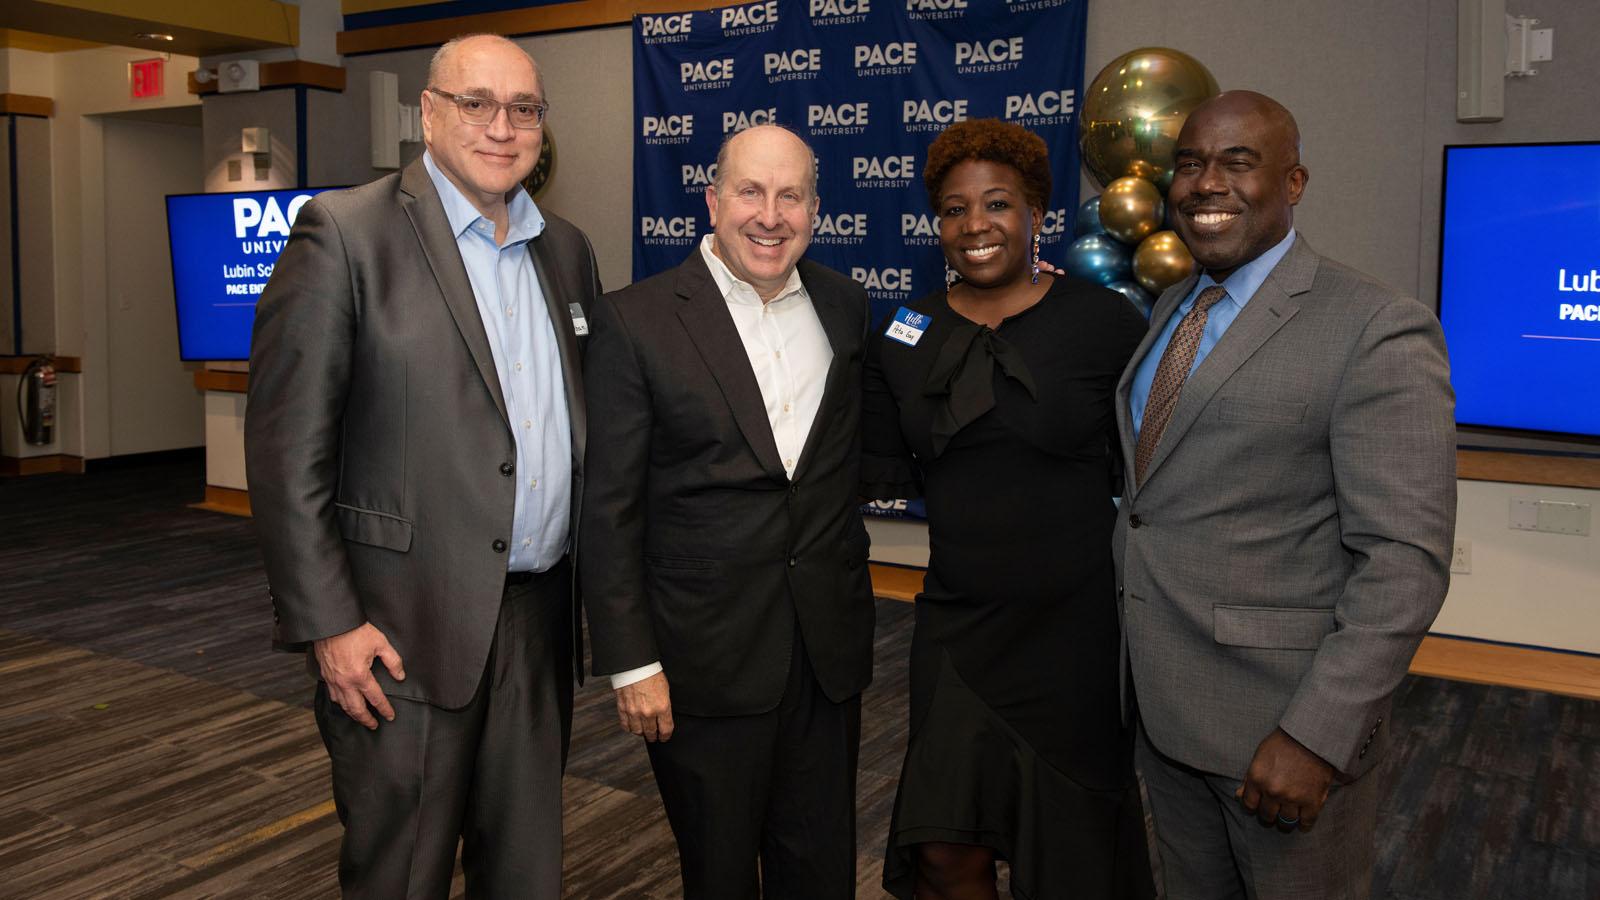 Dean Jonathan Hill (Seidenberg), Pace President Marvin Krislov, Peta-Gay Clark (Pace Board of Trustees), and Dean Horace E. Anderson, Jr. (Haub Law School) pose for a picture.